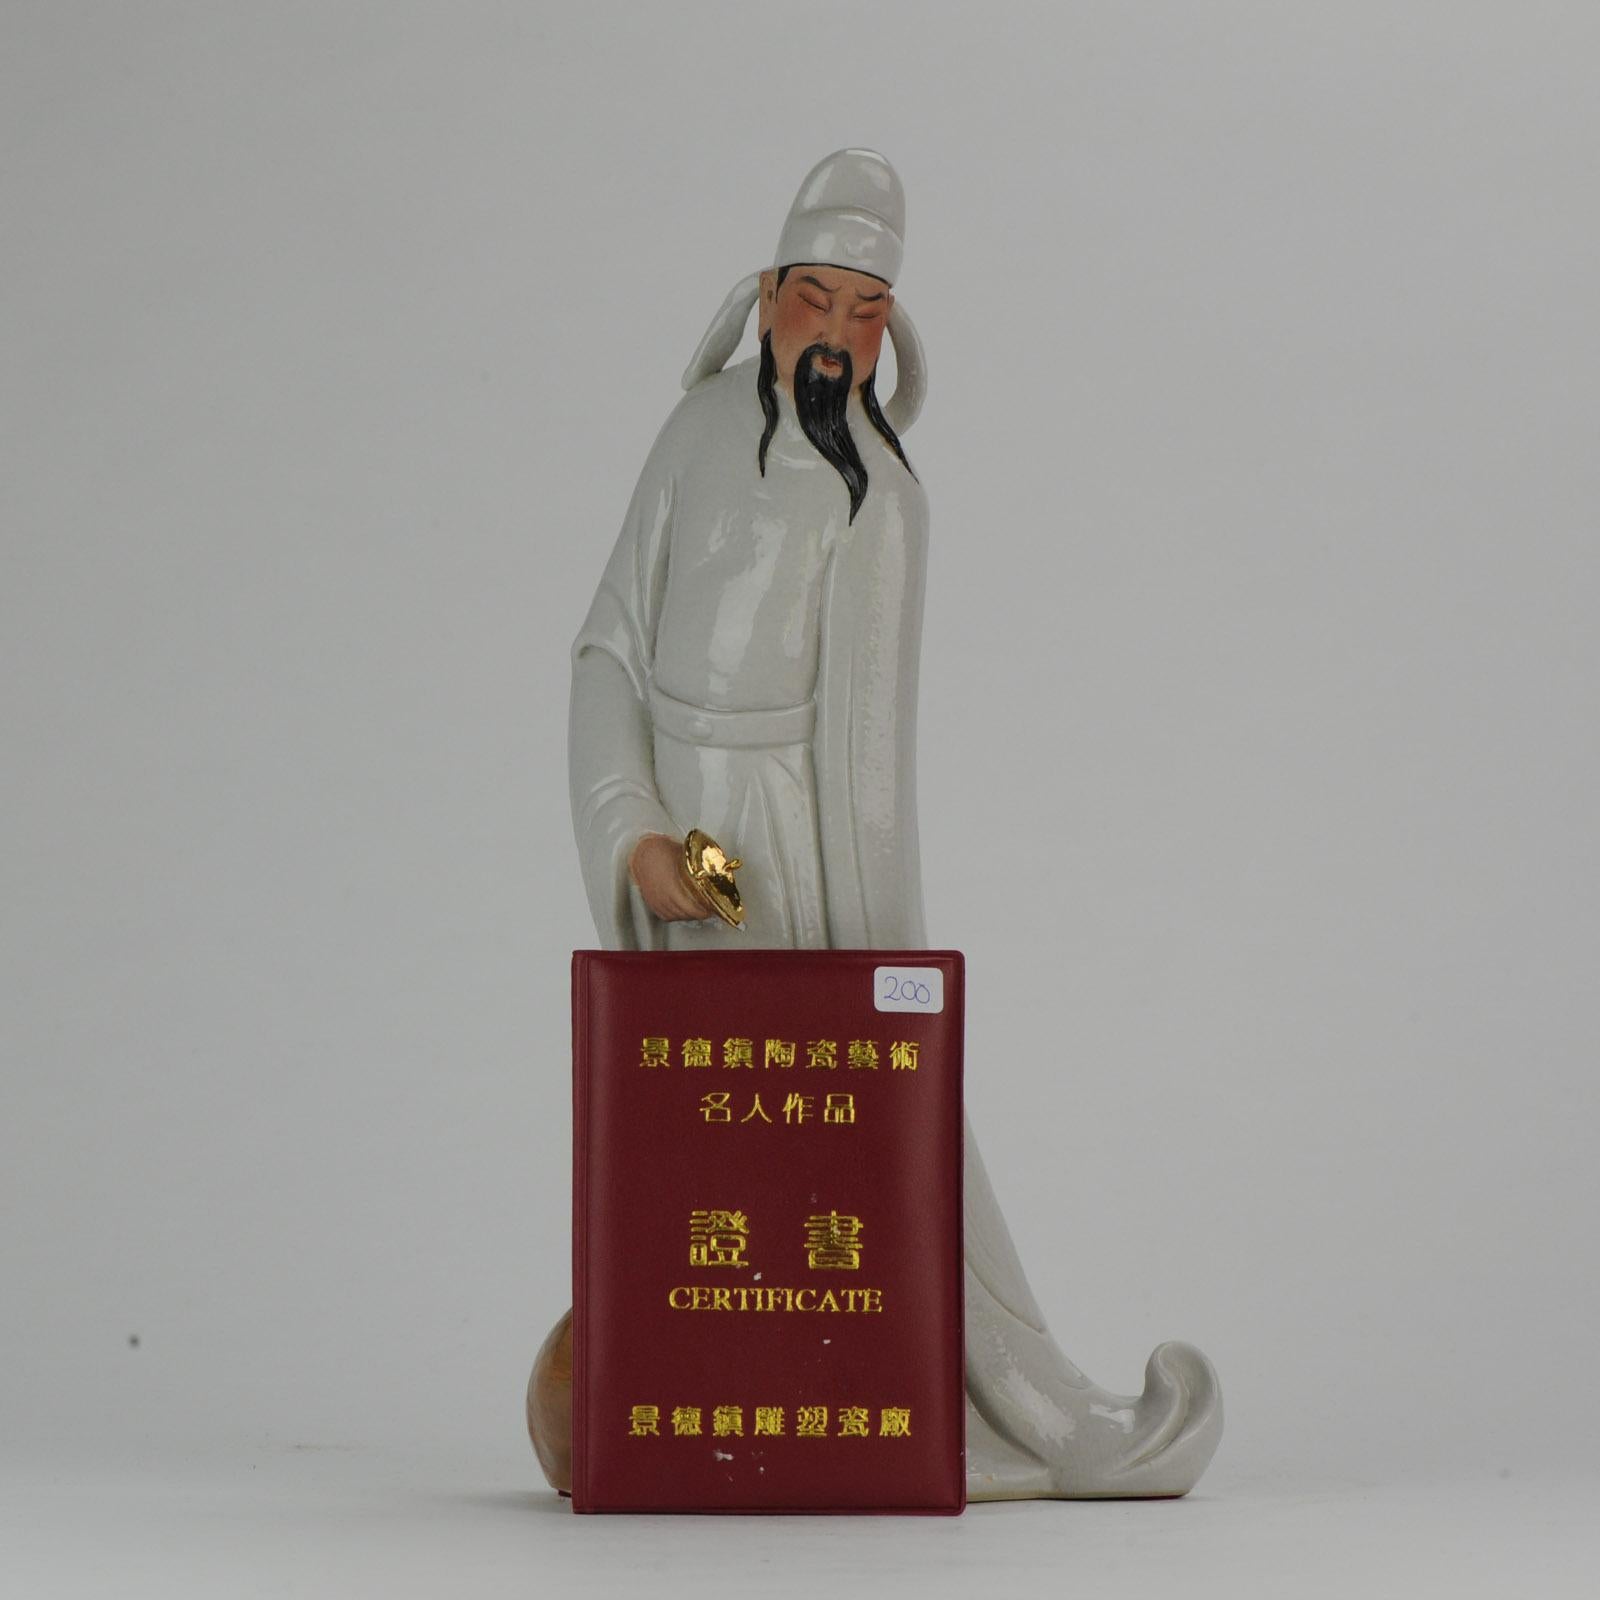 Chinese Porcelain Sculpture Man Holding Ritual Vessel, Dated 1998, Wang Qiang For Sale 11